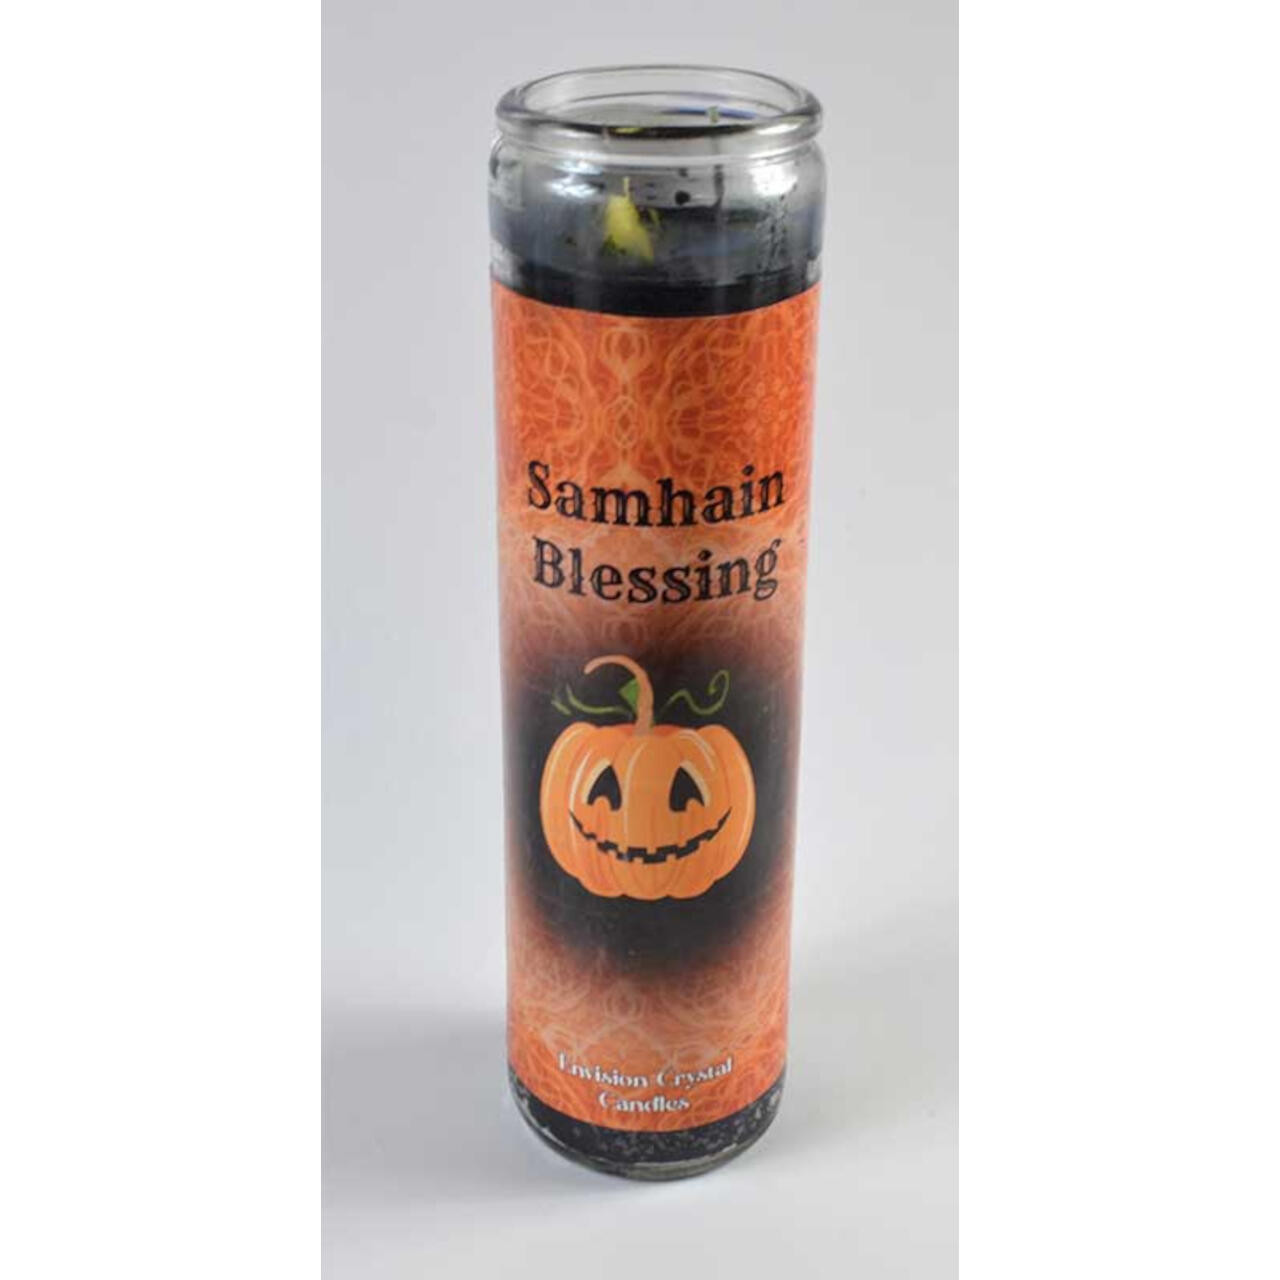 Samhain Blessing Aromatic Jar Candle